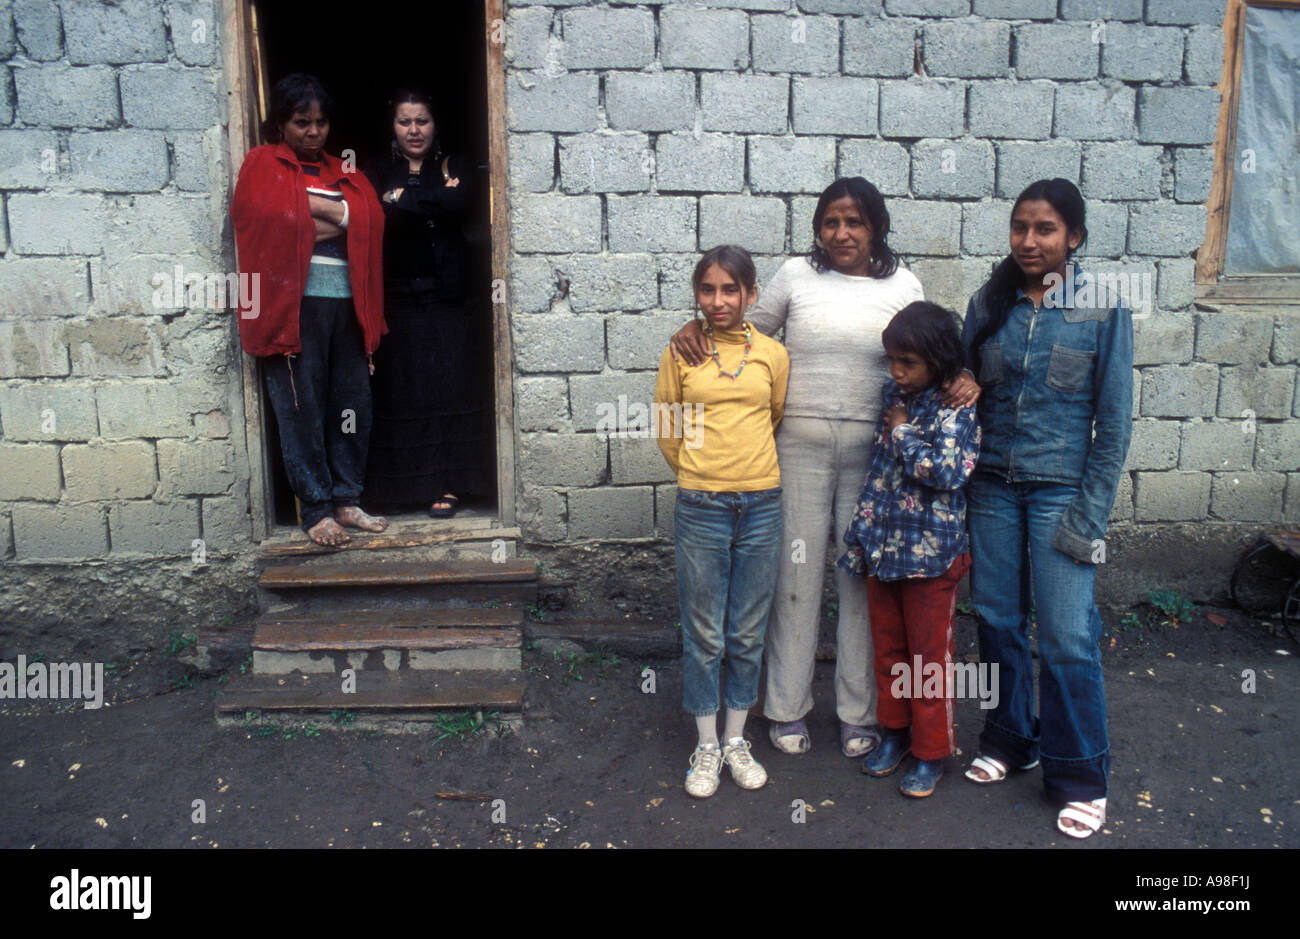 A mother and three children pose outside a house while two others look on from doorway in Gypsy village of Soard, Transylvania. Stock Photo